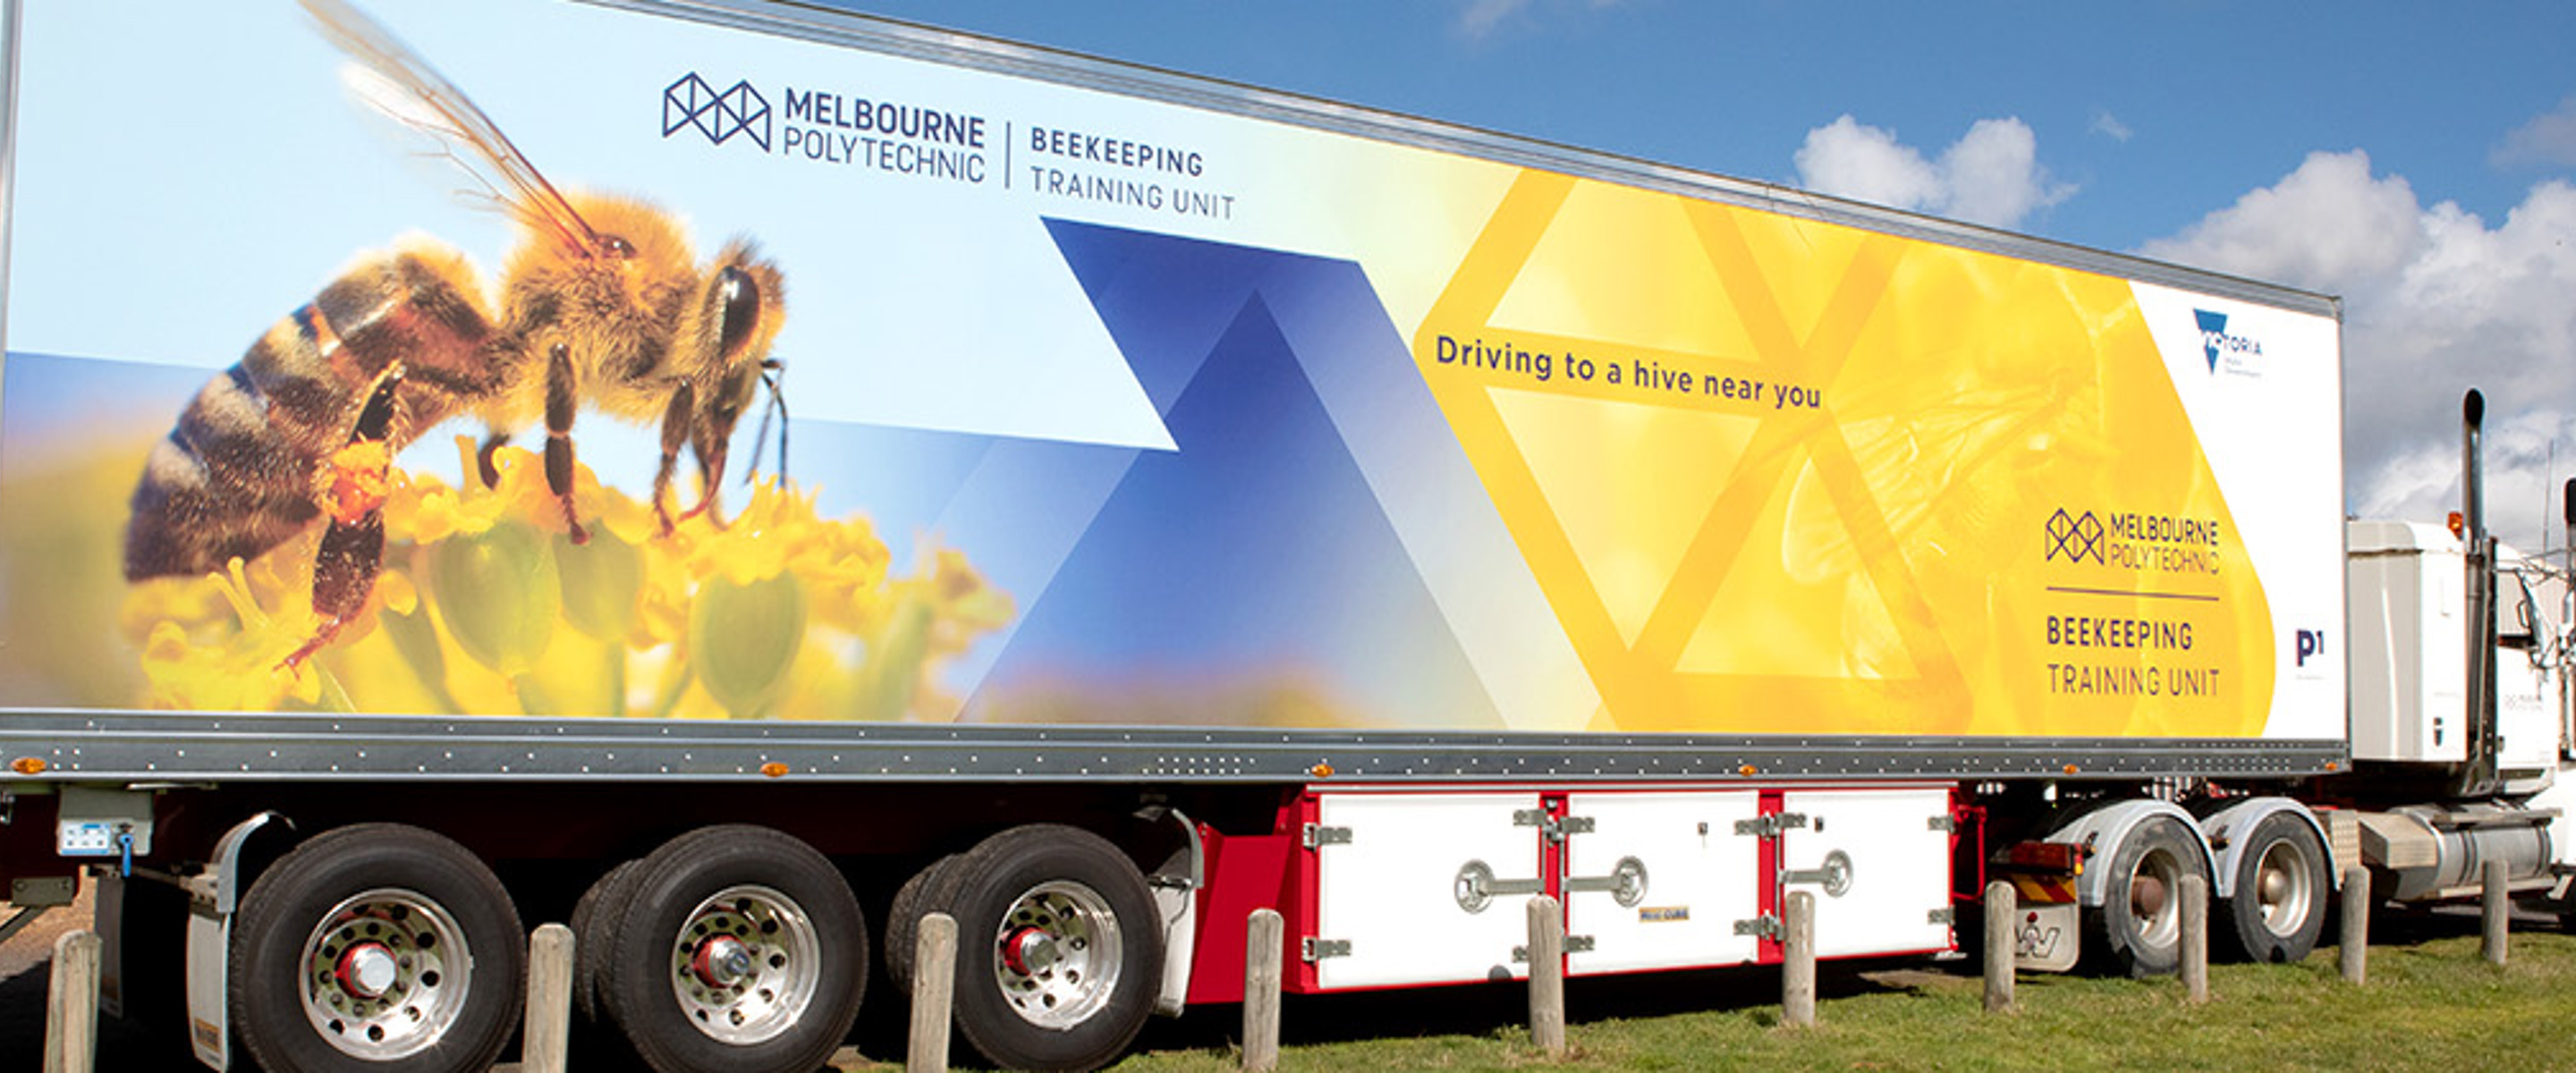 A large truck with "Melbourne Polytechnic Beekeeping Training Unit" and an image of a bee printed on the side.